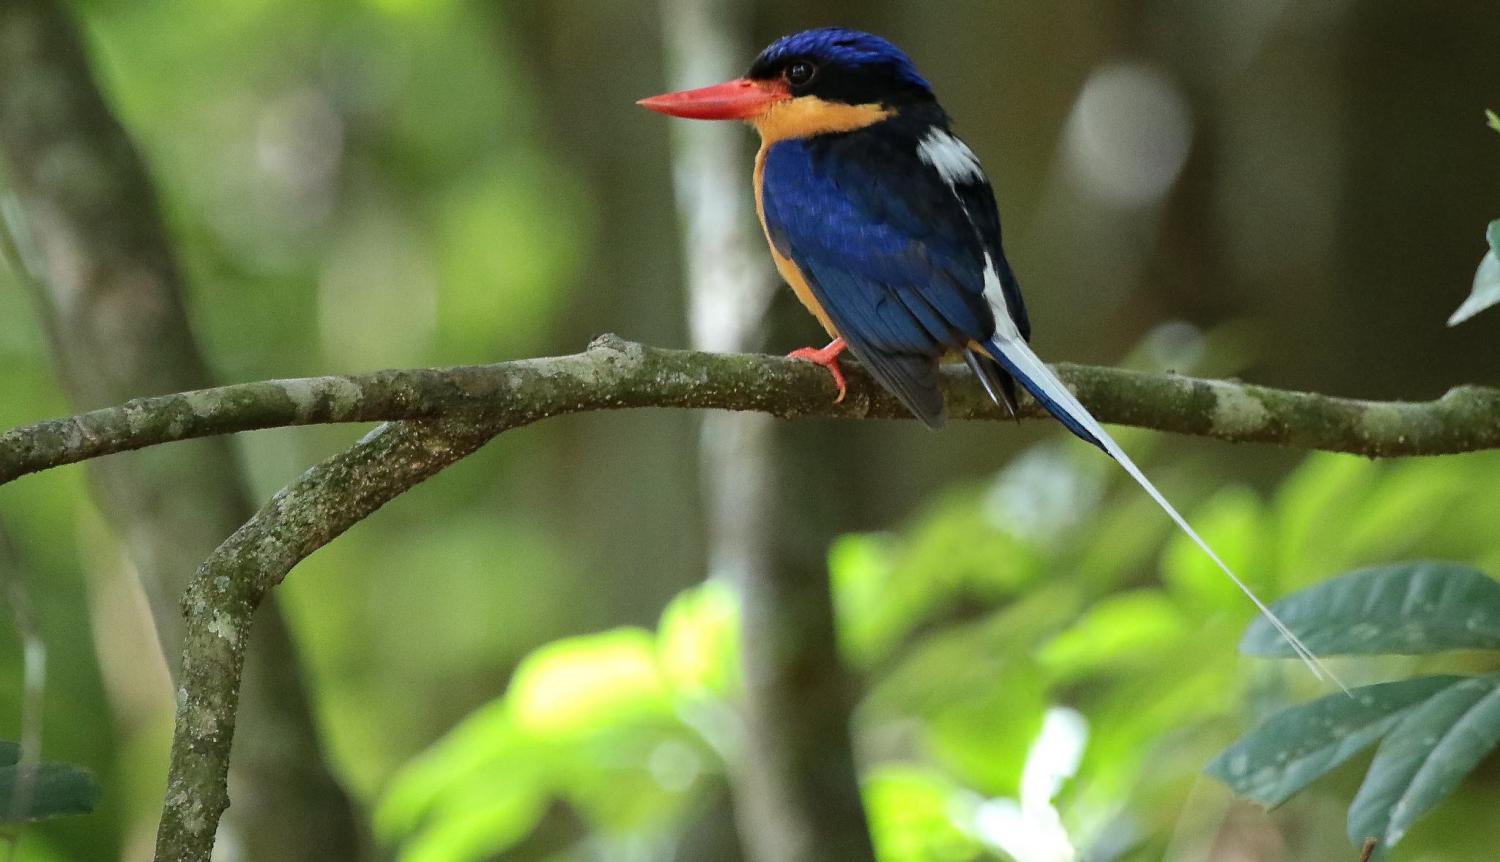 The Buff-breasted Paradise-Kingfisher migrates each year between PNG and northern Australia (Photo: Graham Winterflood/Flickr)